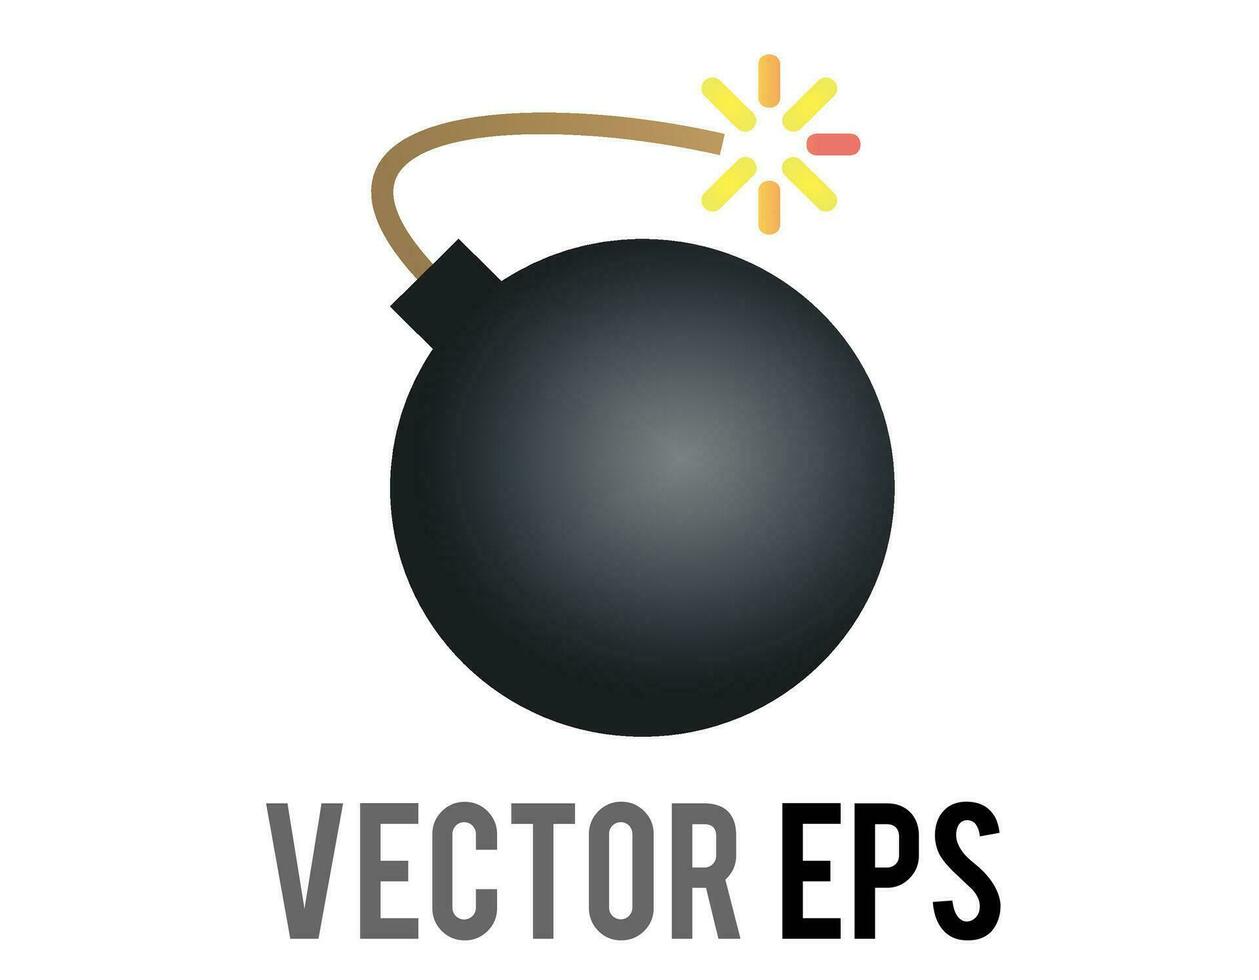 Vector cartoon styled black bomb icon, depicted as black ball with burning fuse